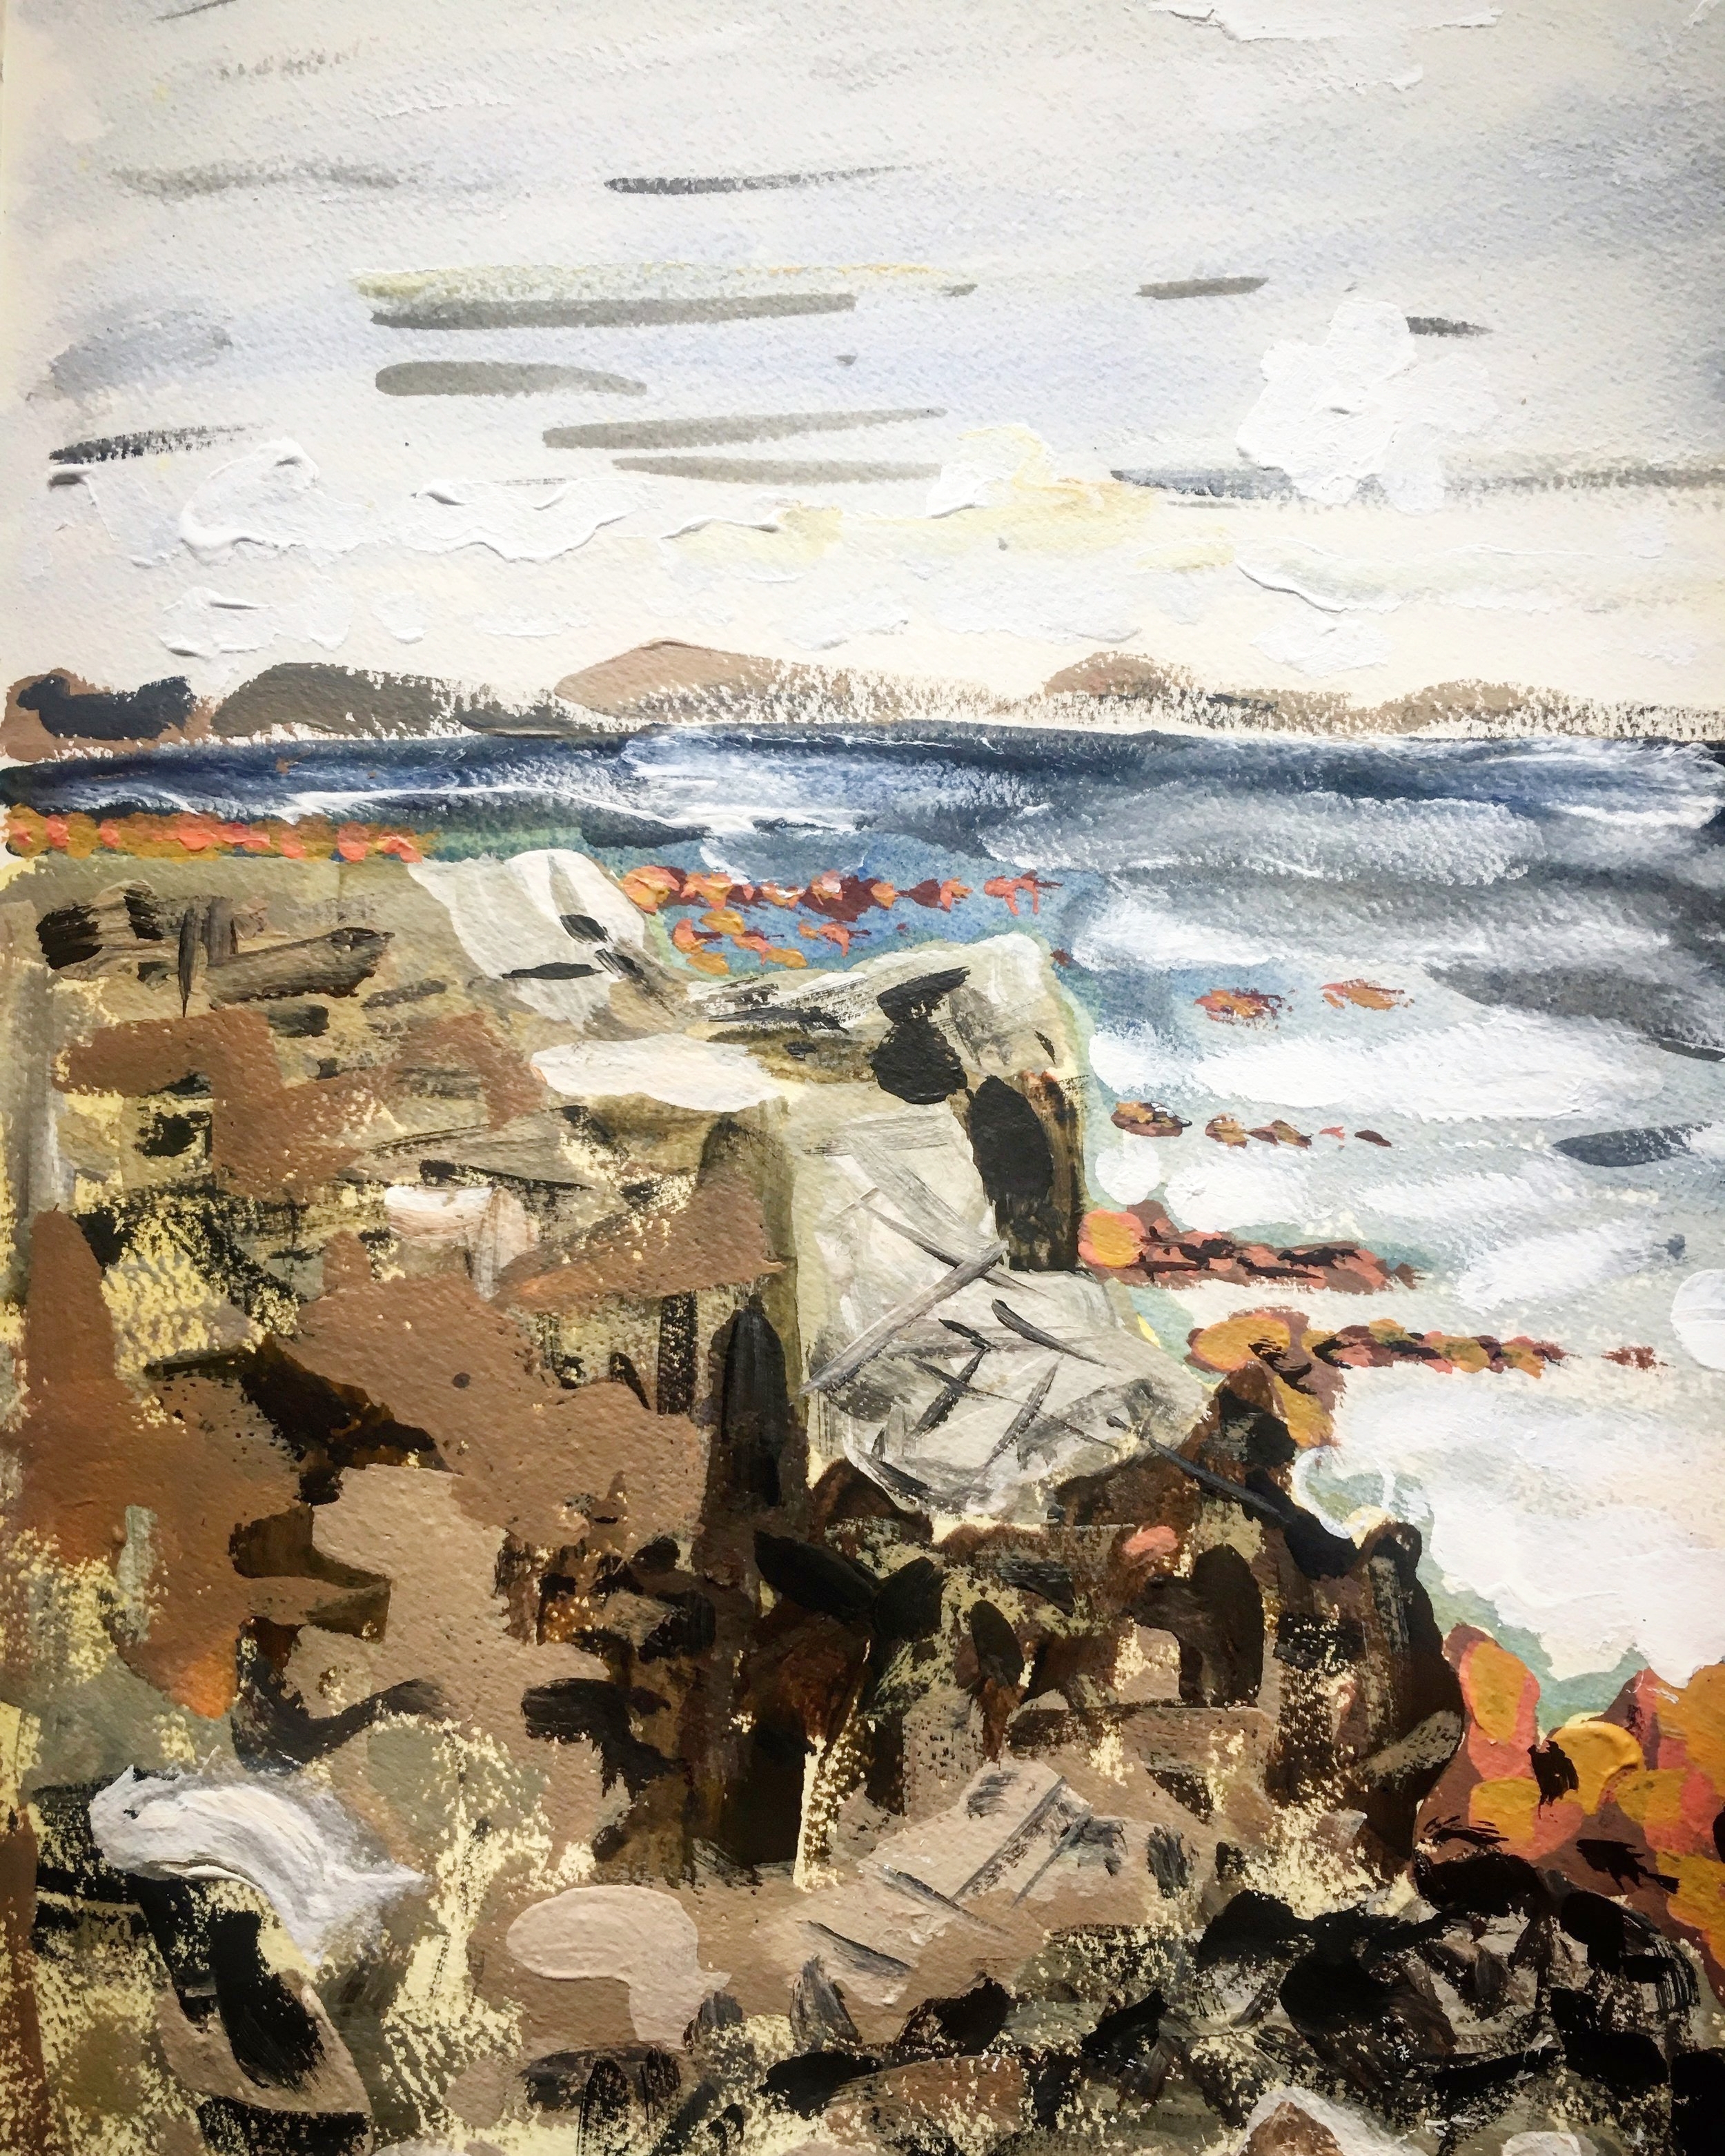   Rocks, Sea and Wind, Rossadillisk Co. Galway , acrylic on paper 42x30cm August 2018 (sold) 